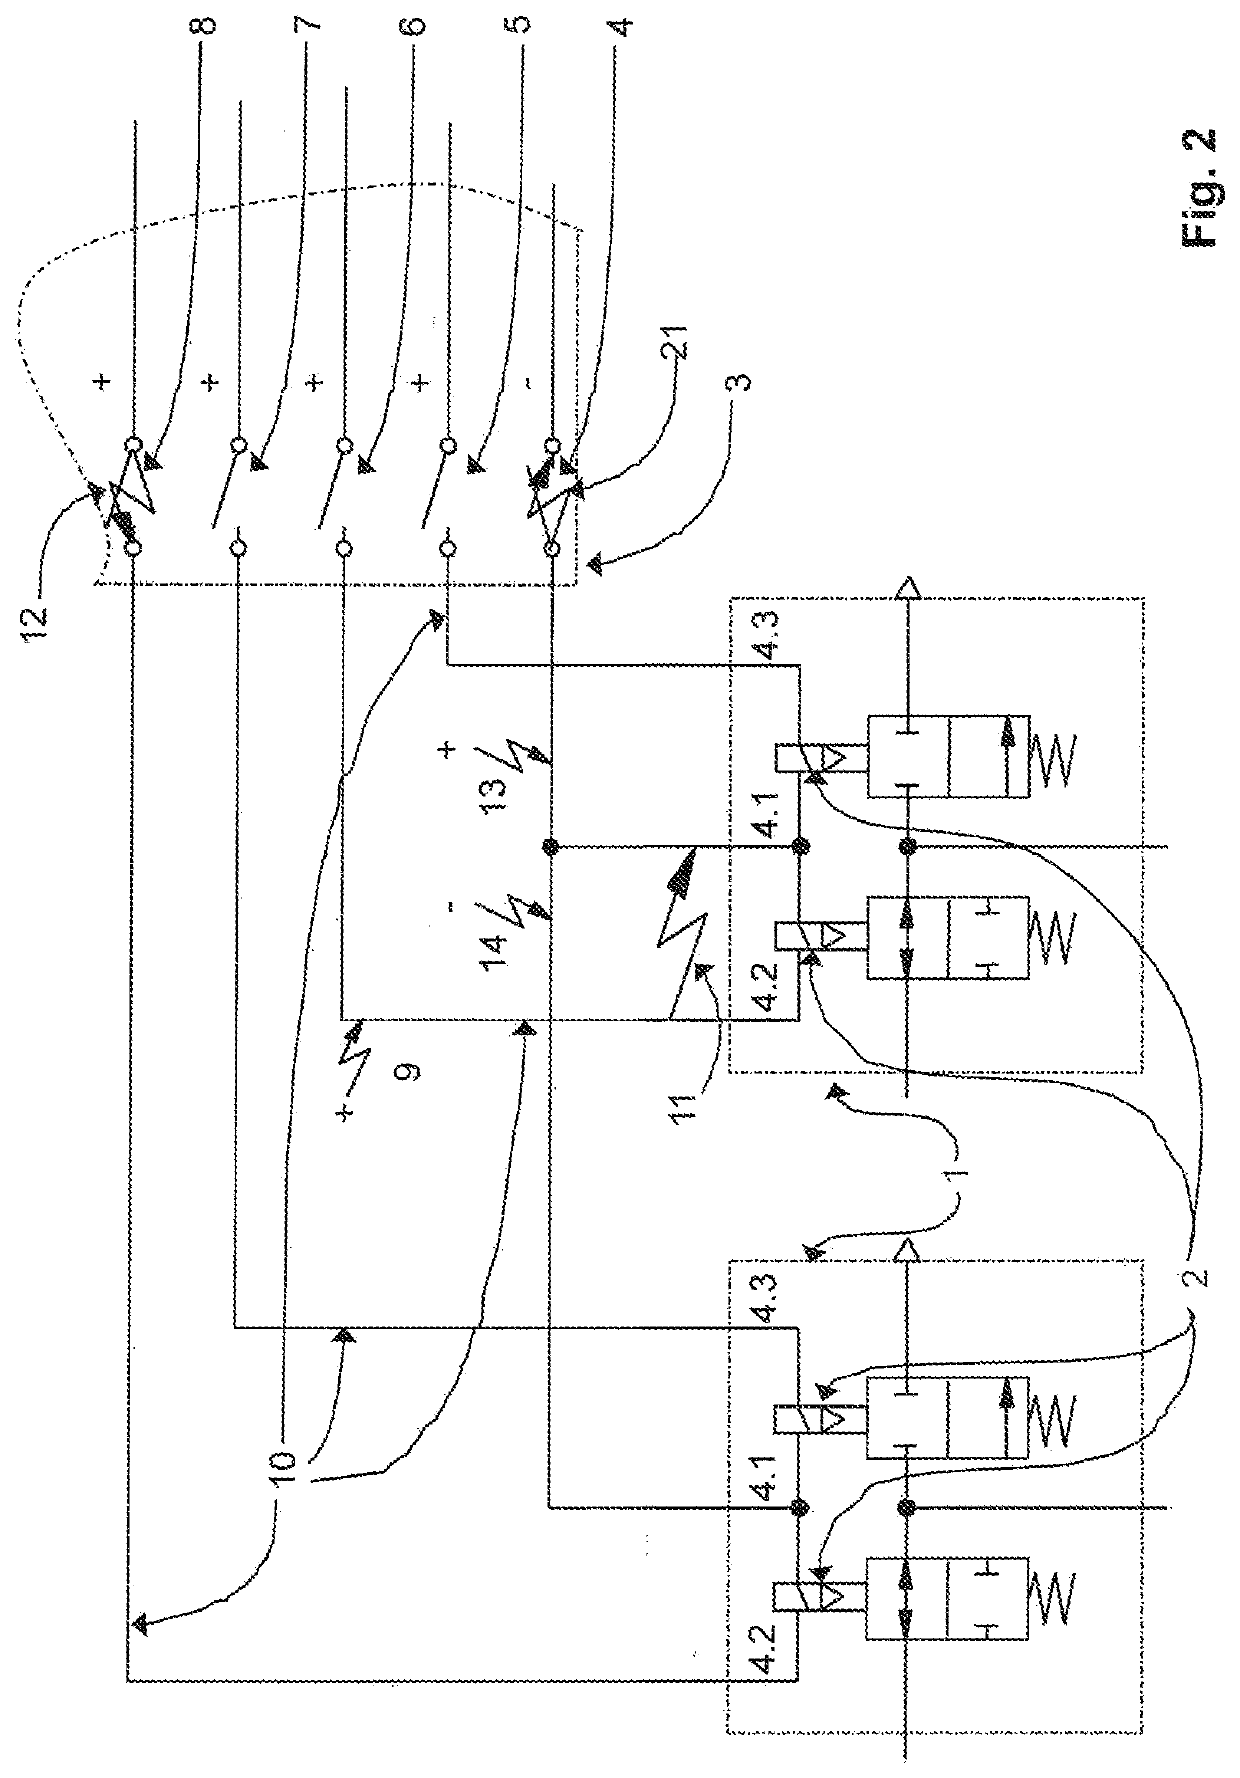 Protective device for decoupling electric control circuits in a redundant system for autonomous driving